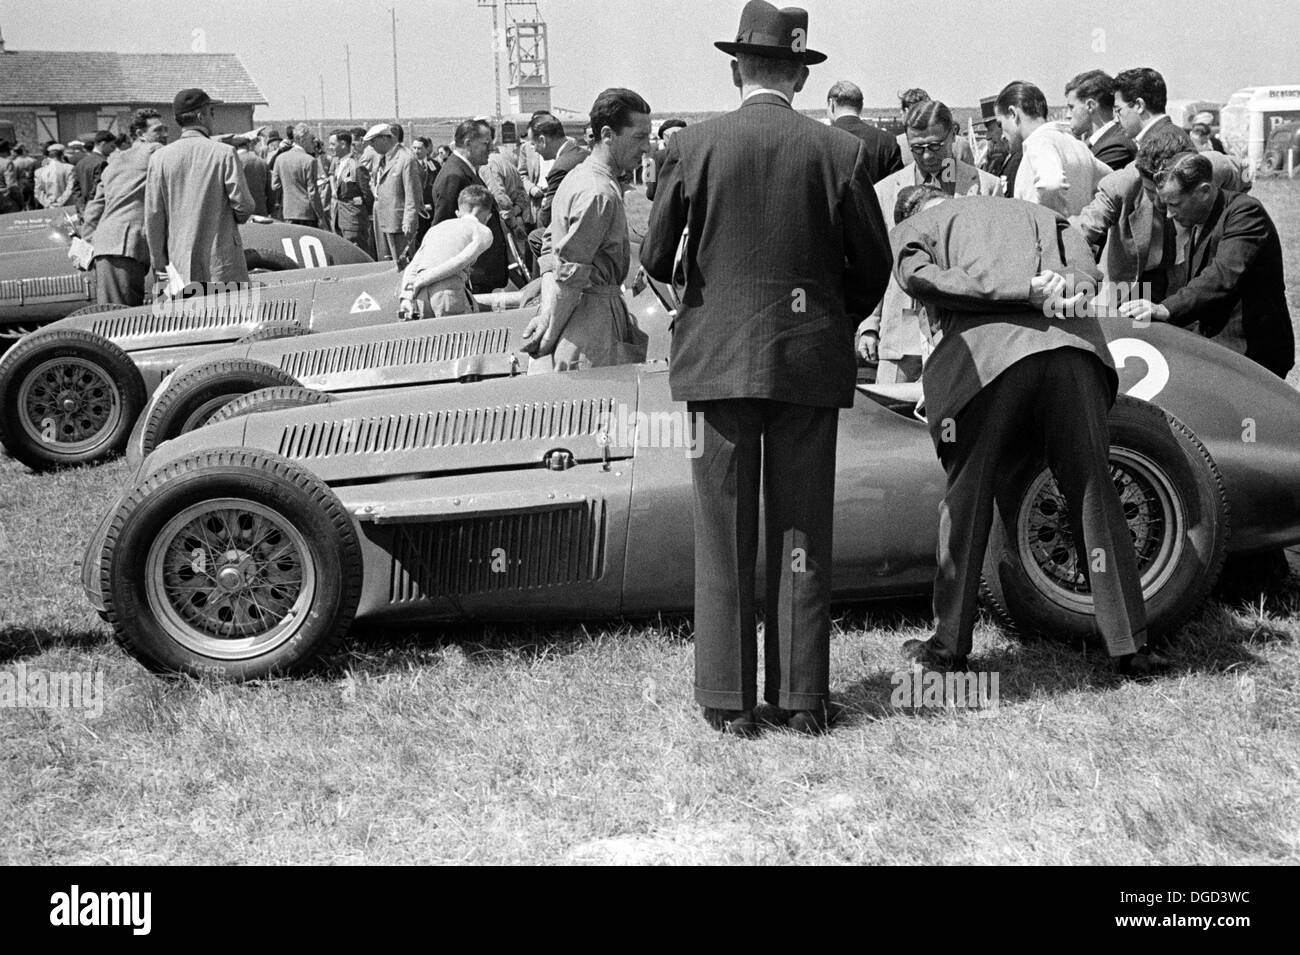 Alfa Romeo 158 Alfettas in the paddock at the French Grand Prix, Reims, France 1951. Stock Photo